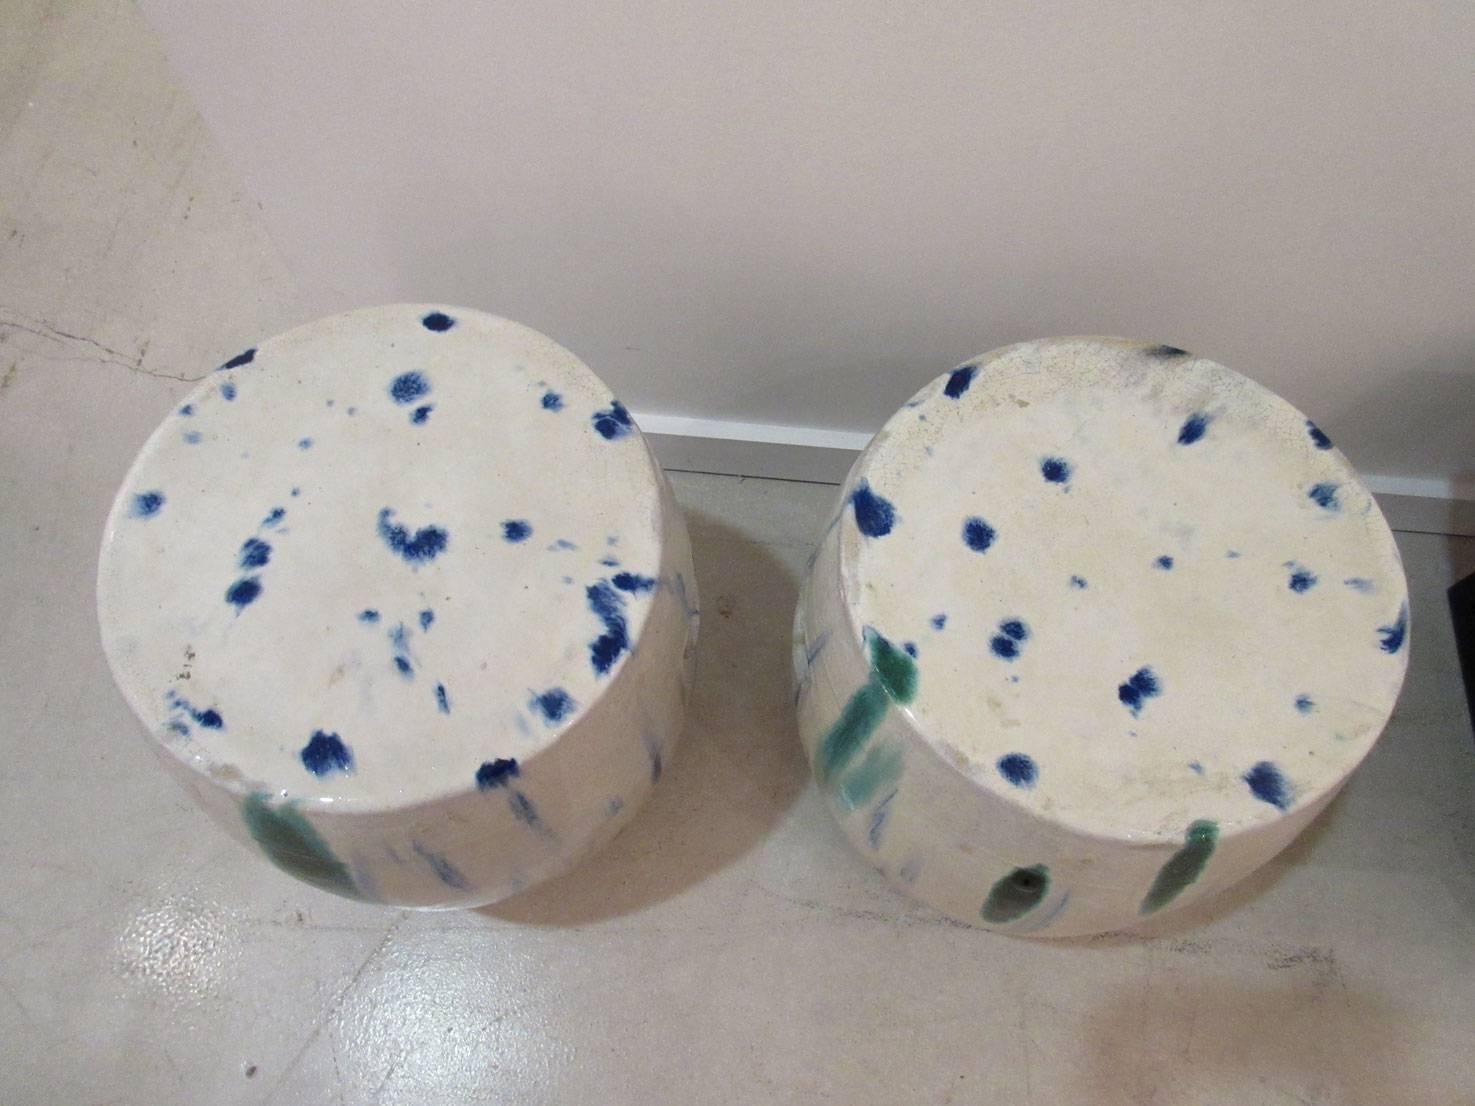 Pair of Chinese Ceramic Garden Seats with Blue and Green Tie-Dye Glaze 2